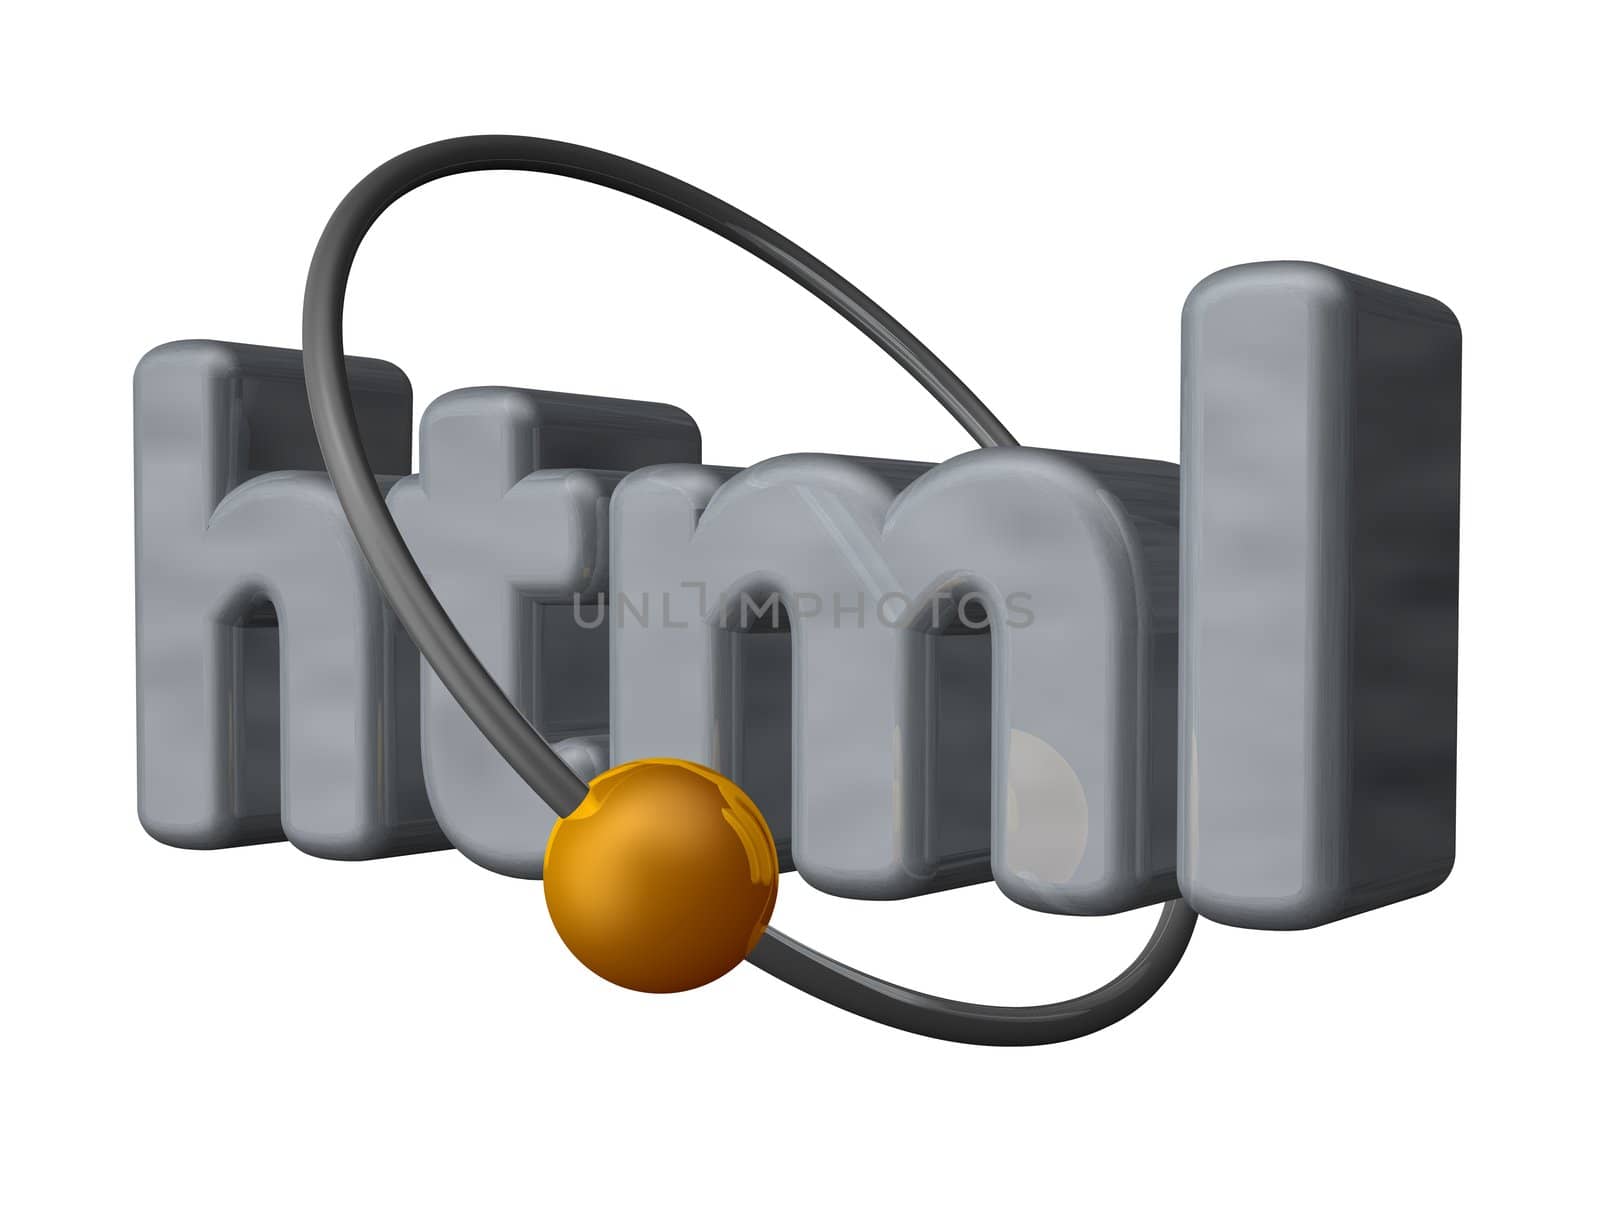 golden ball fly around the letters html - 3d illustration